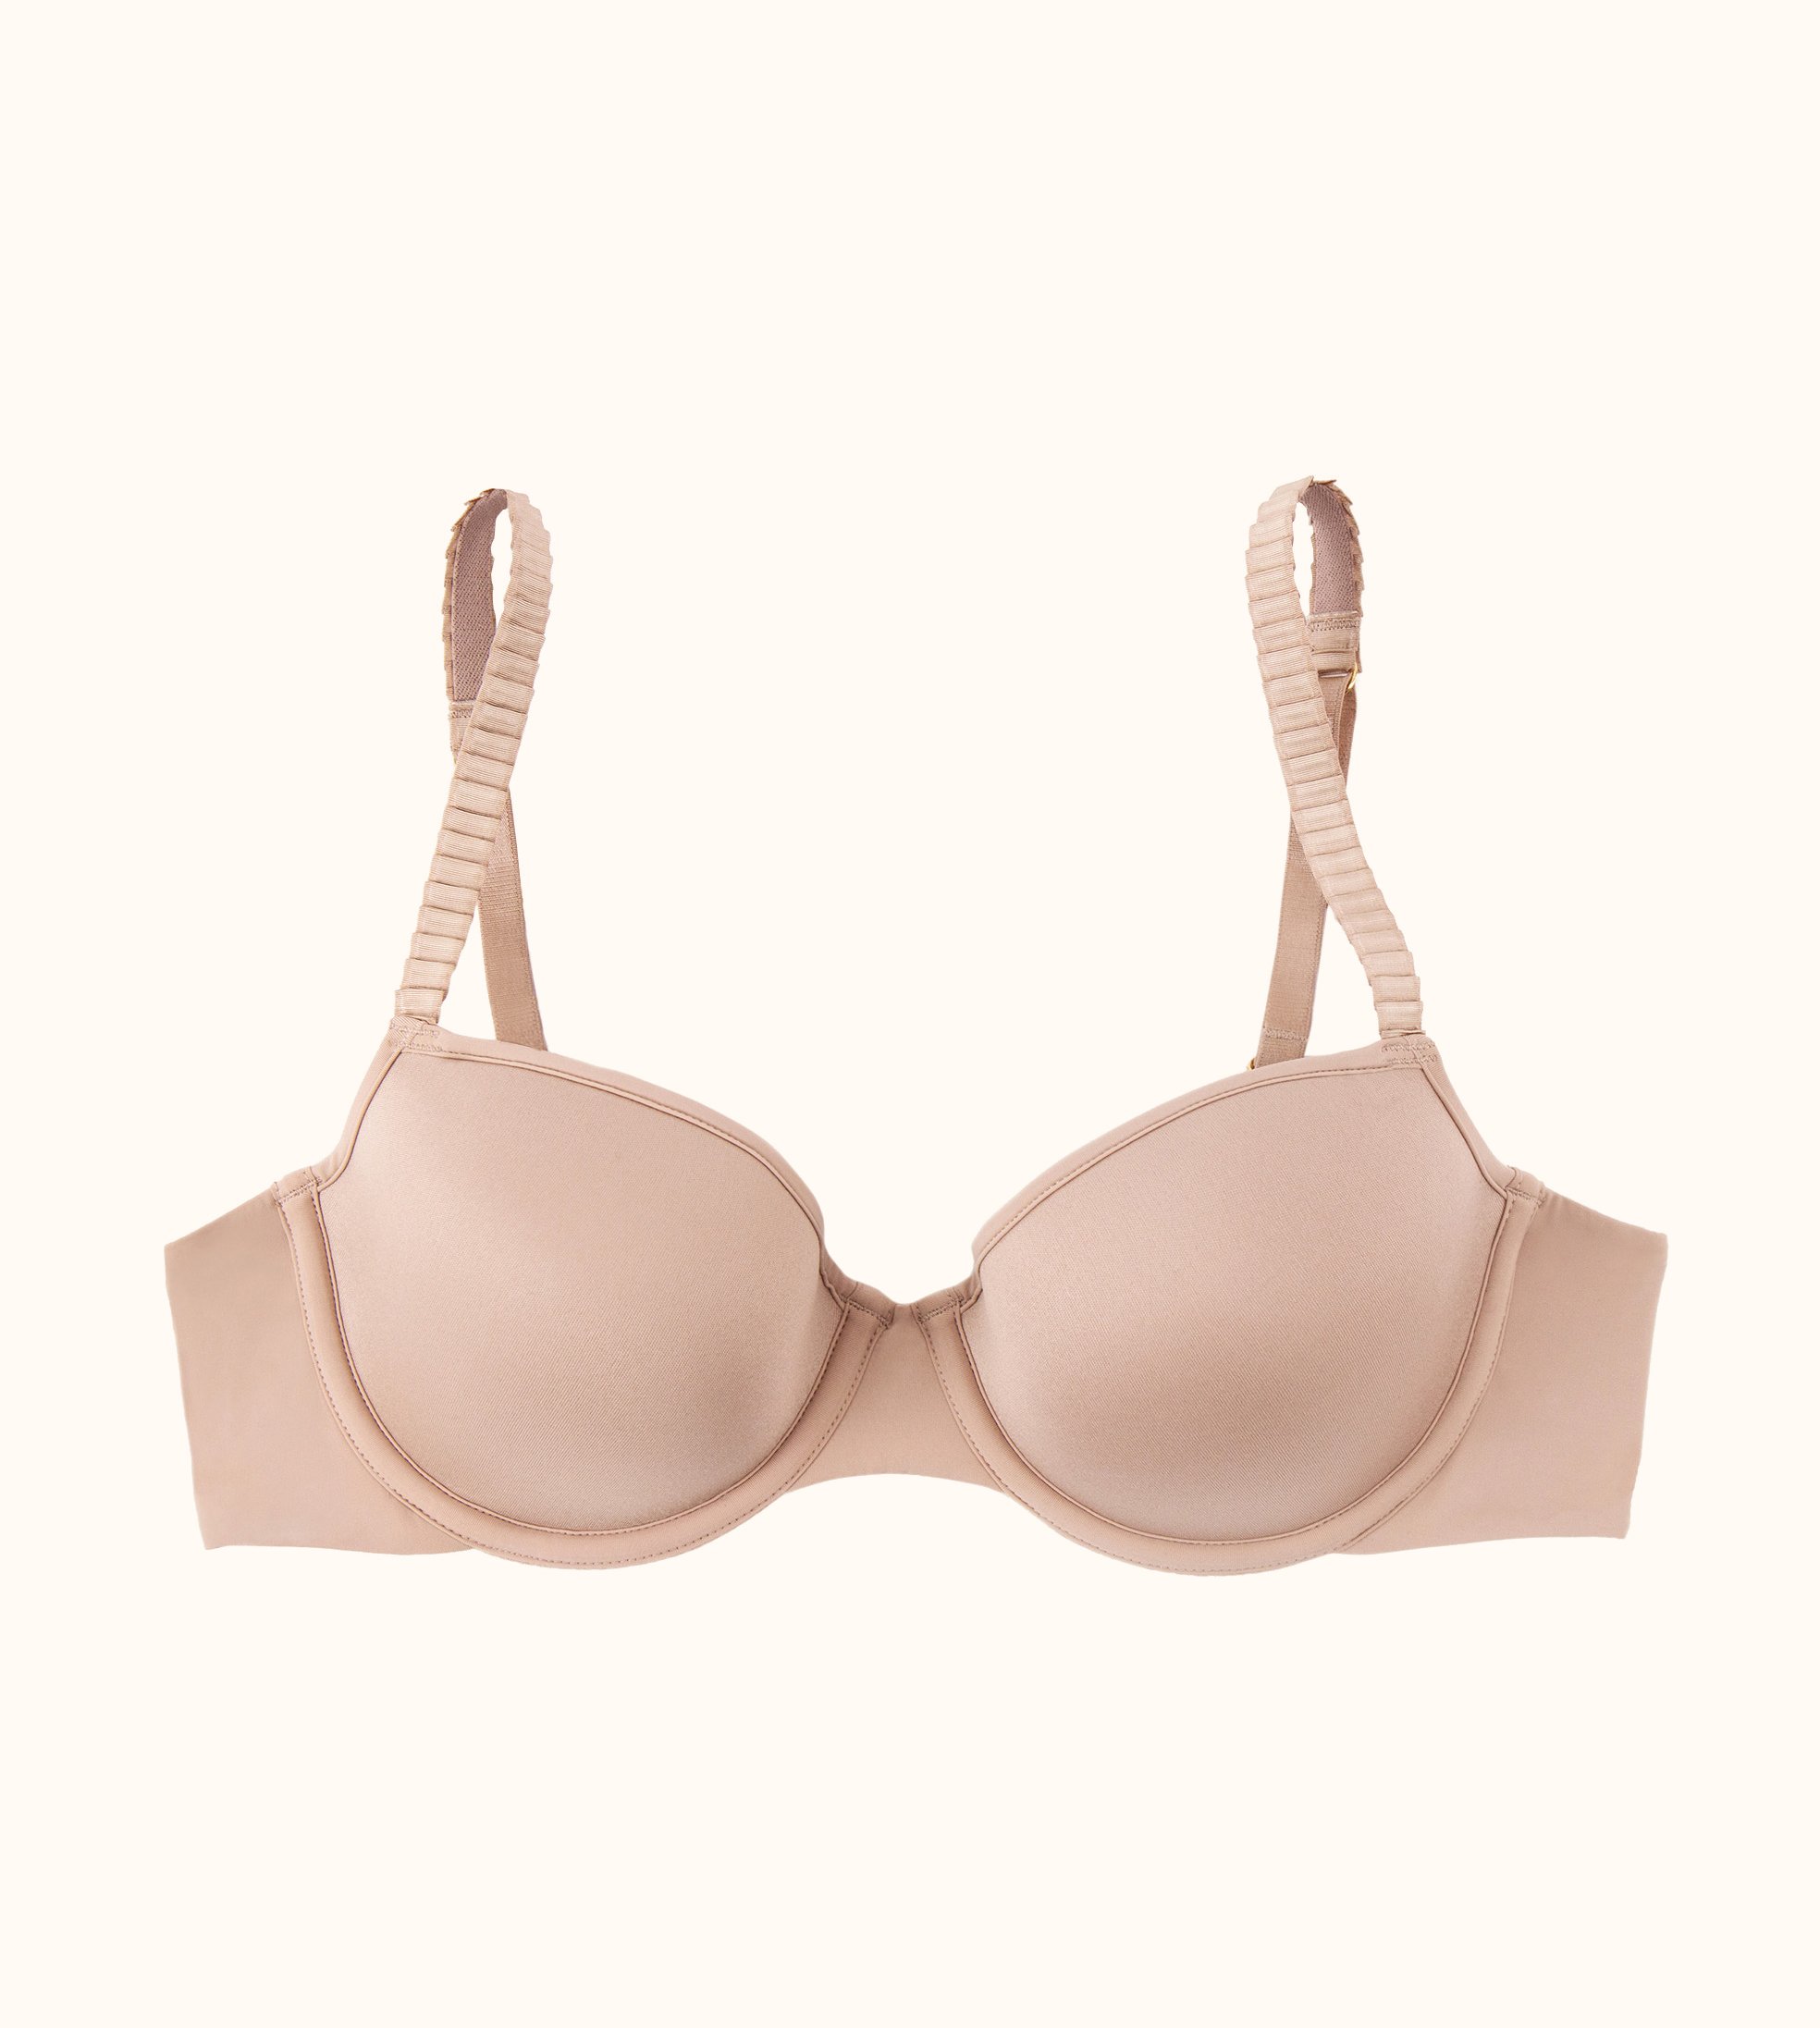 Thirdlove NWT 24/7 Classic T-shirt Bra in Soft Pink Size 30D Tan